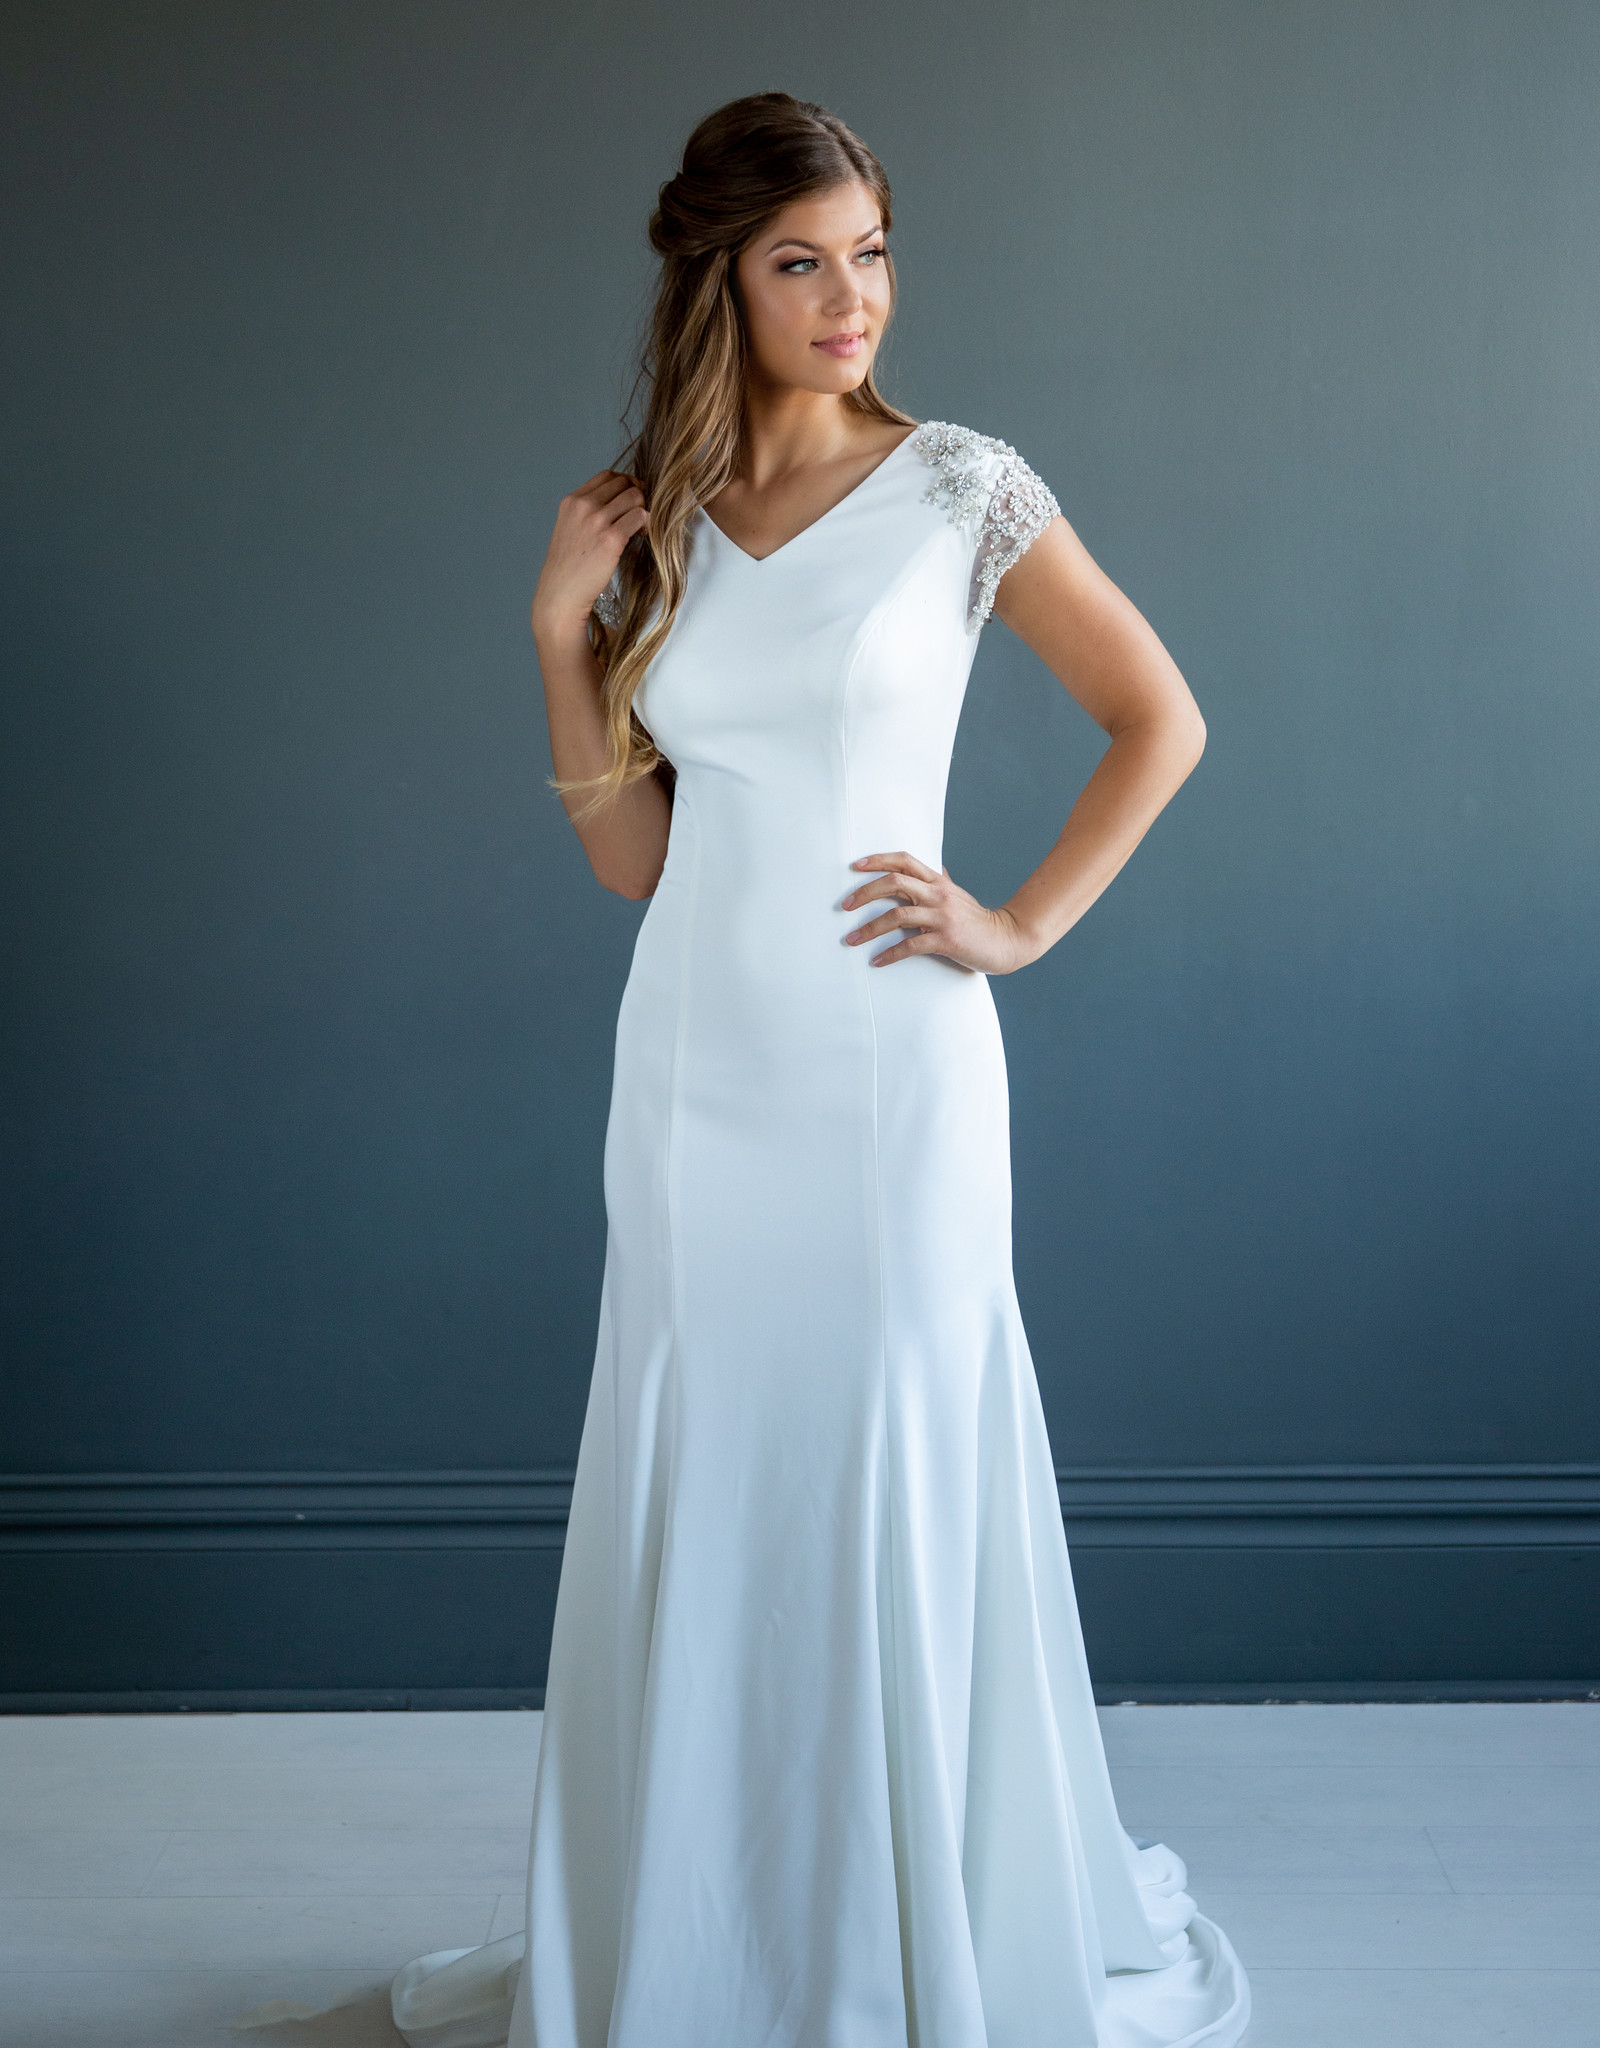 The Modest Bridal Collection Kinsley